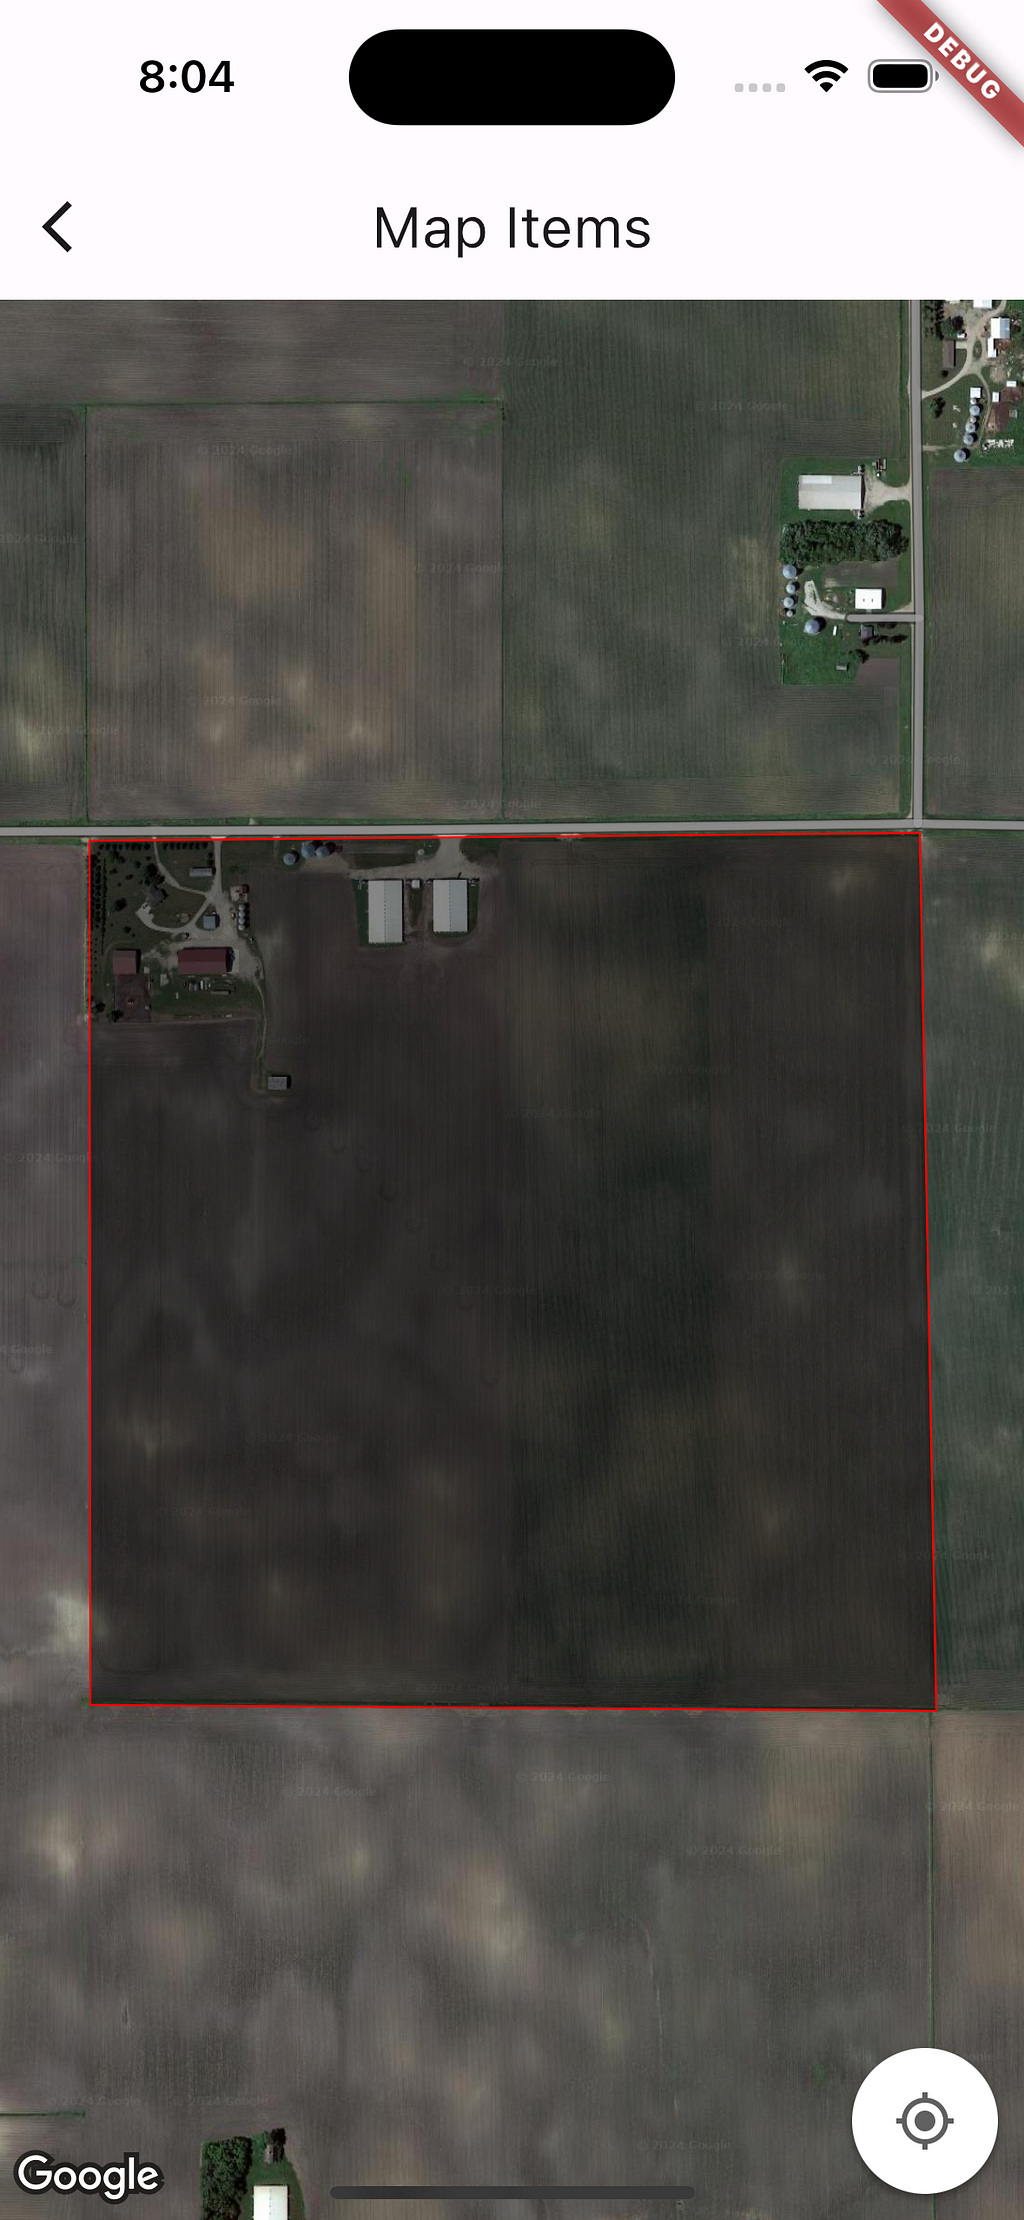 A screenshot of a map open on a smartphone. The map is showing satellite image of a farm in Northern part of USA. A polygon is drawn on the map. The Polygon has four sides, colour of each side is red and the polygon is filled with translucent black color.